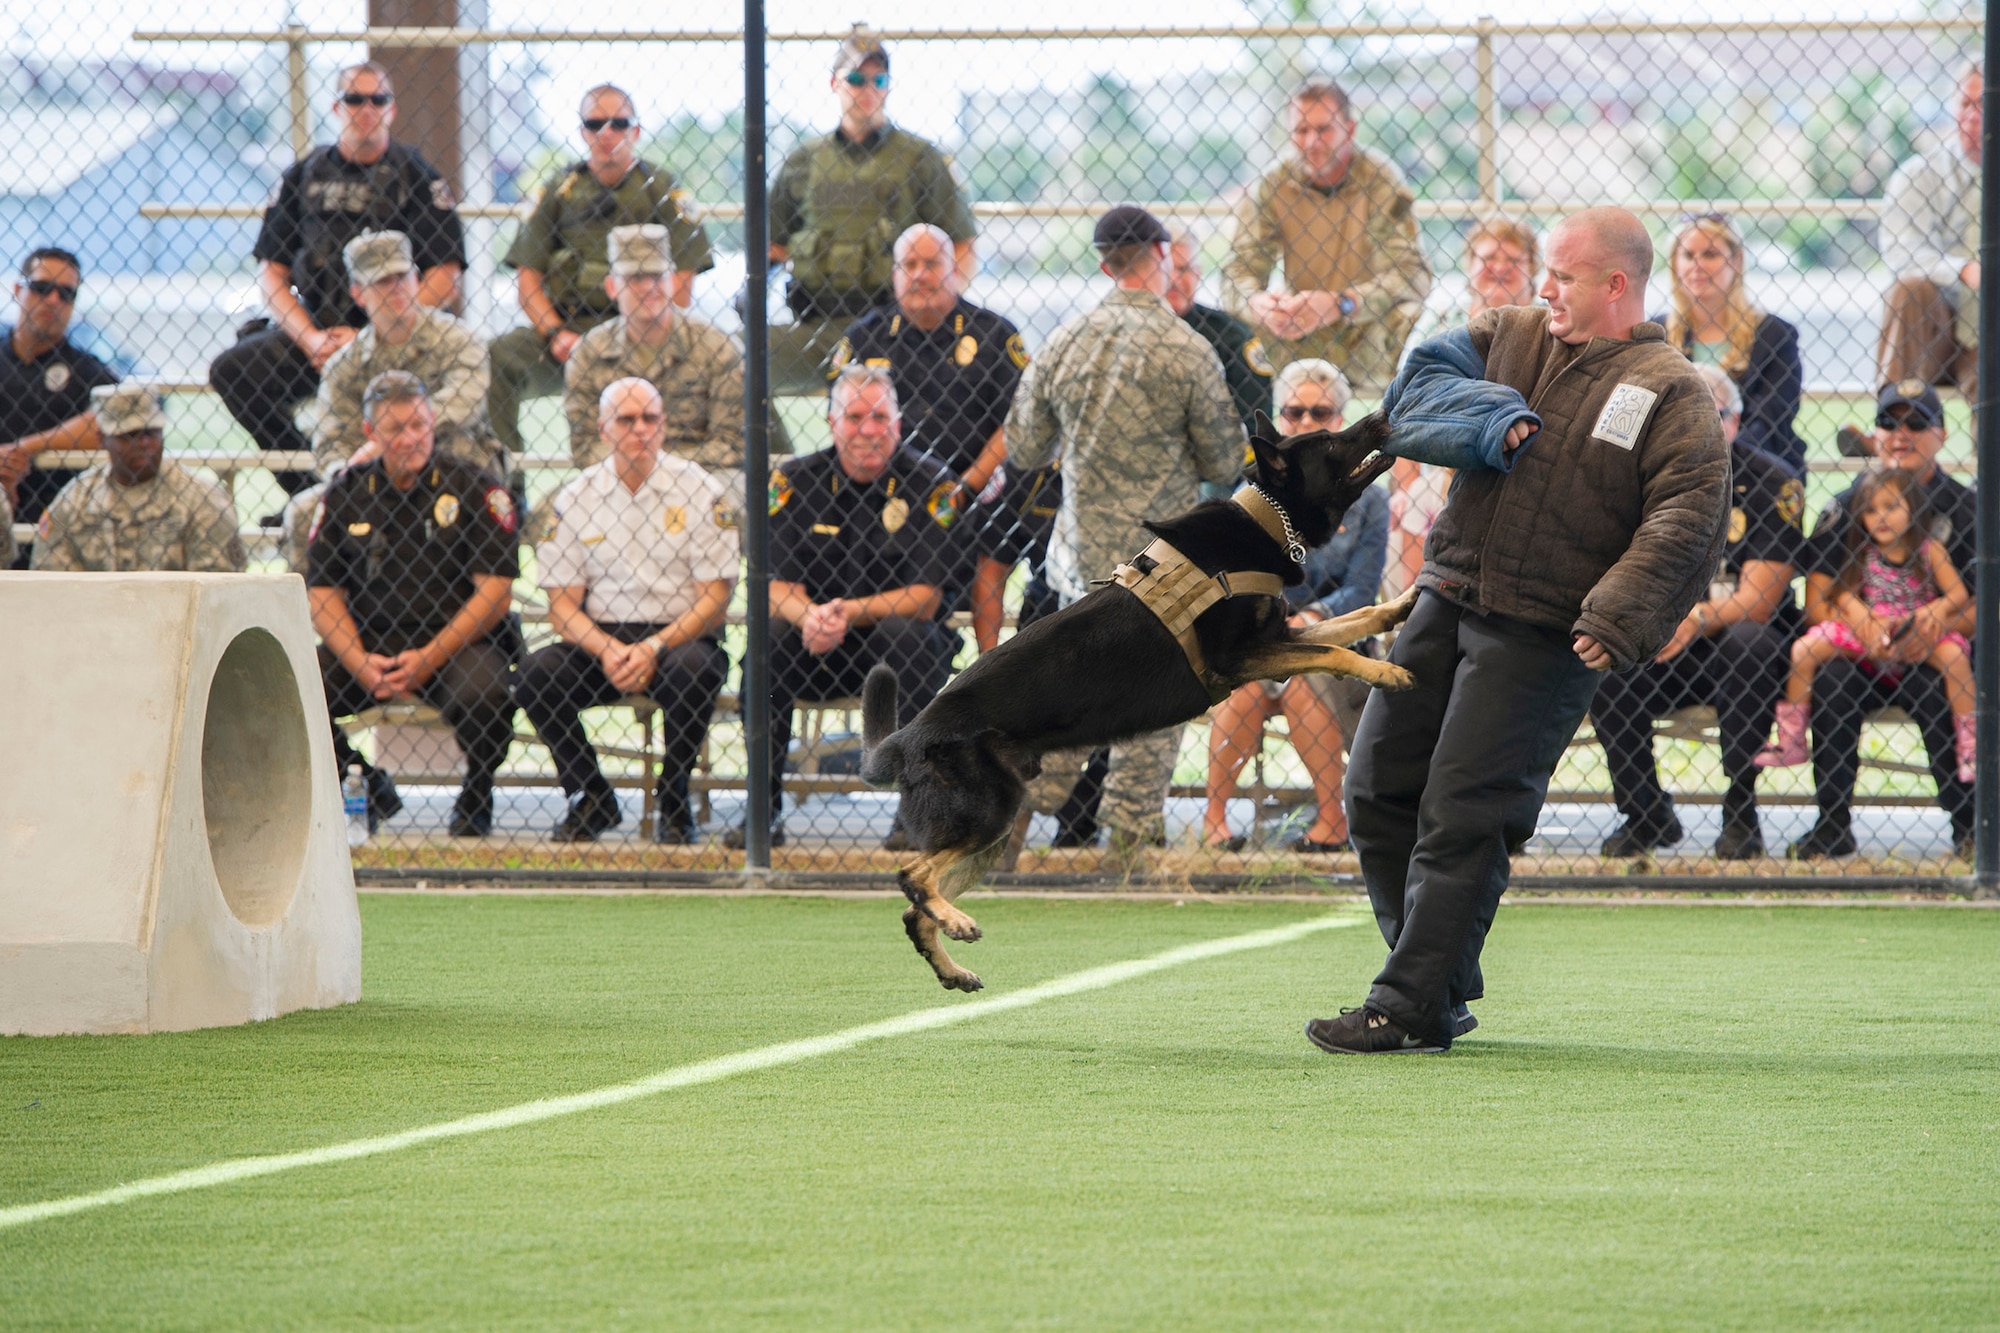 The 45th Security Forces Squadron held a ribbon cutting ceremony to unveil an upgraded military working dog obedience yard at Patrick Air Force Base, Fla., May 11, 2016.The ceremony included a military working dog demonstration and featured Chiefs of Police and local law enforcement K-9 officers from across Brevard County. Among the upgrades include a canopy which lowers the temperature 10 to 20 degrees and keeps the team training year-round all while reducing the impact of rain, sun and heat on our training operations. (U.S. Air Force photos/Matthew Jurgens/Released)